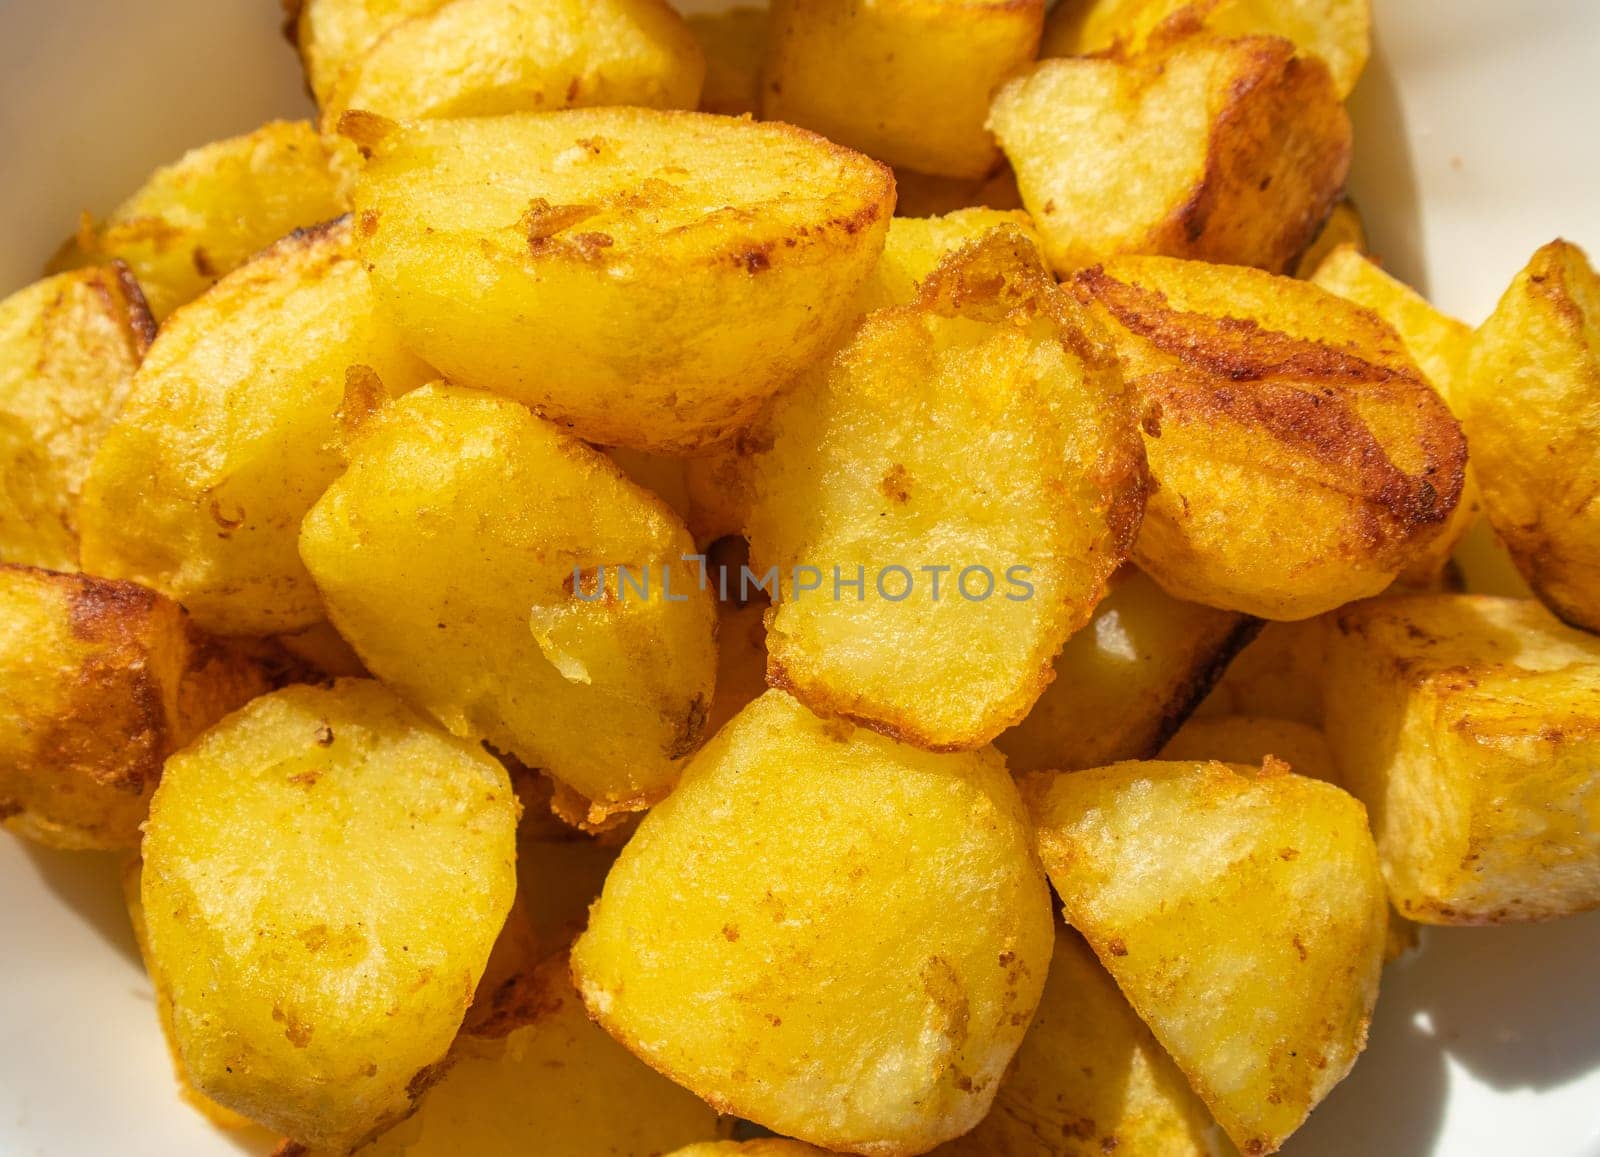 Potatoes fried in a frying pan close-up, lying on a white plate, Horizontal view from above, food background by claire_lucia